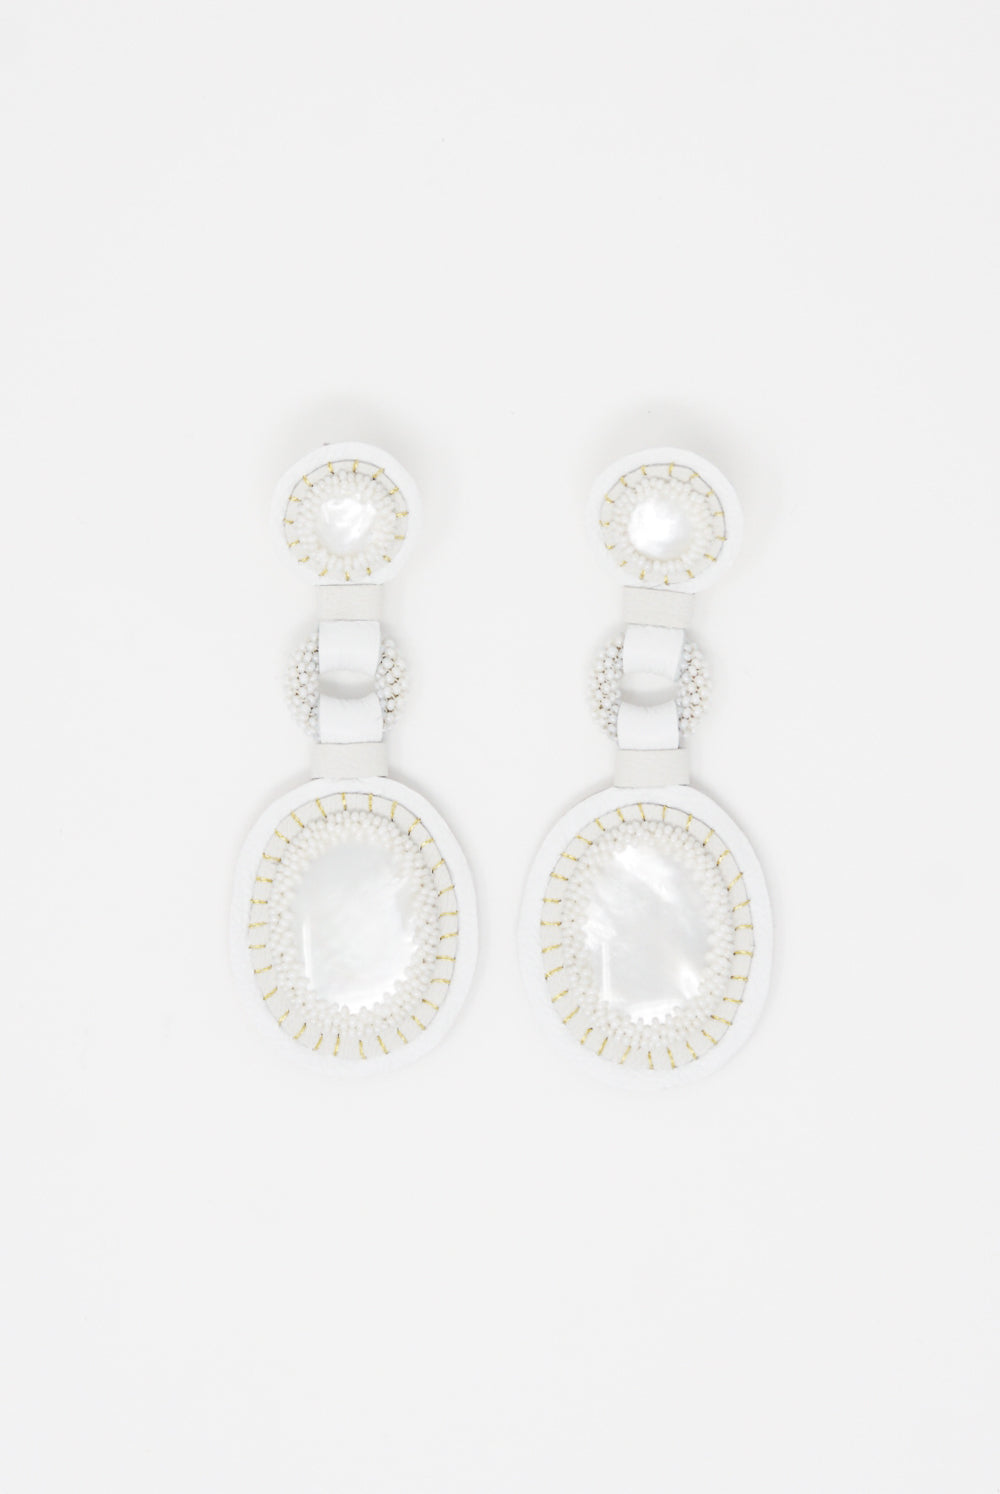 Robin Mollicone - Double Stone Earrings in Mother of Pearl